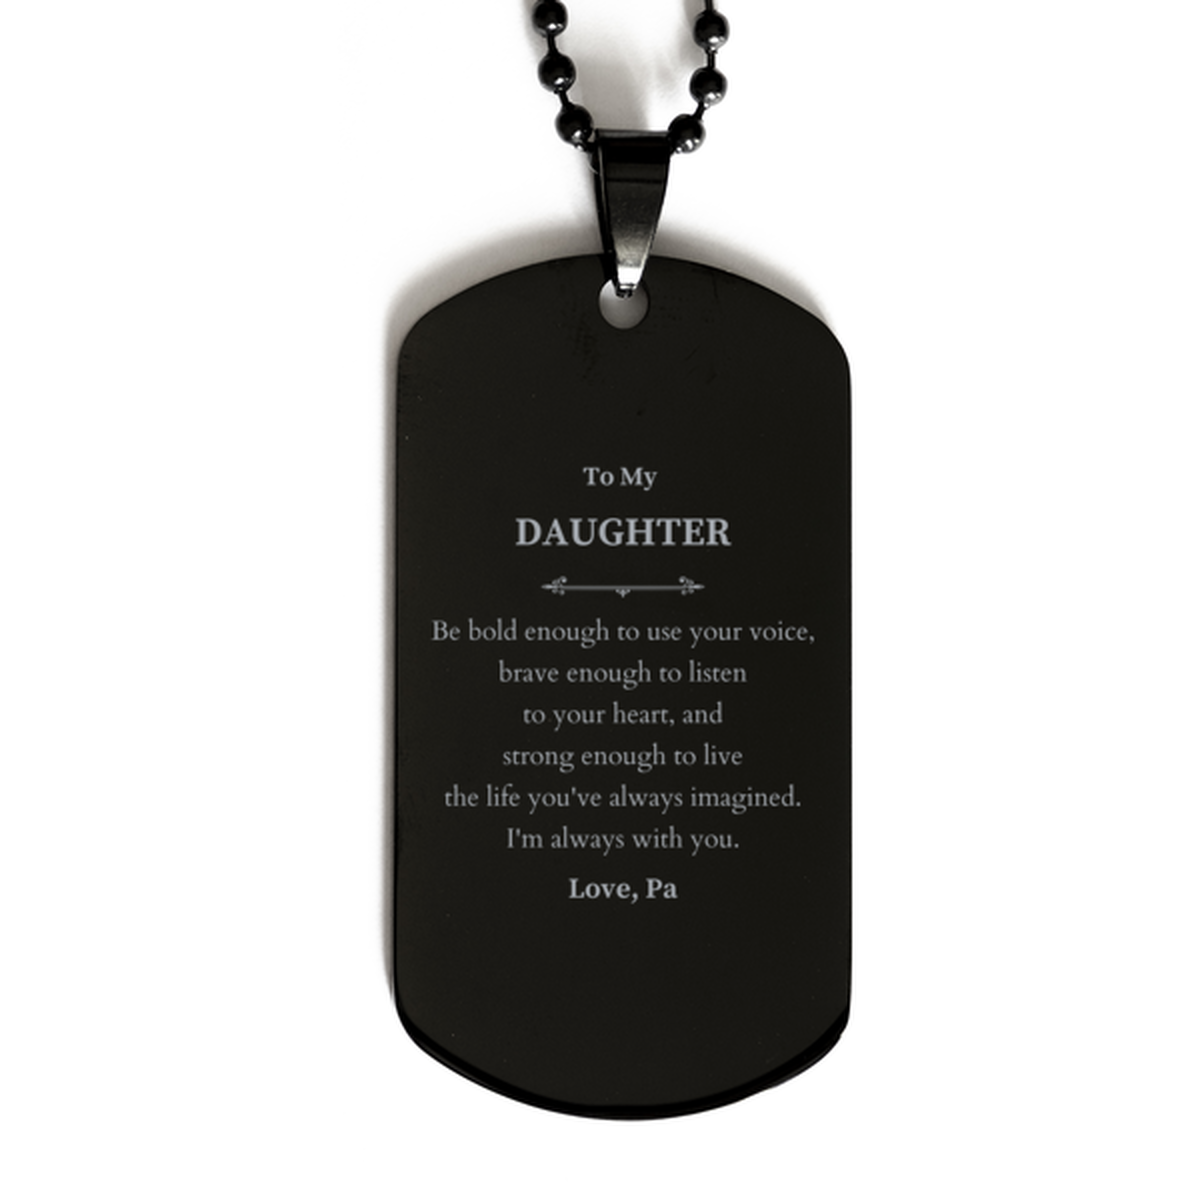 Keepsake Daughter Black Dog Tag Gift Idea Graduation Christmas Birthday Daughter from Pa, Daughter Be bold enough to use your voice, brave enough to listen to your heart. Love, Pa